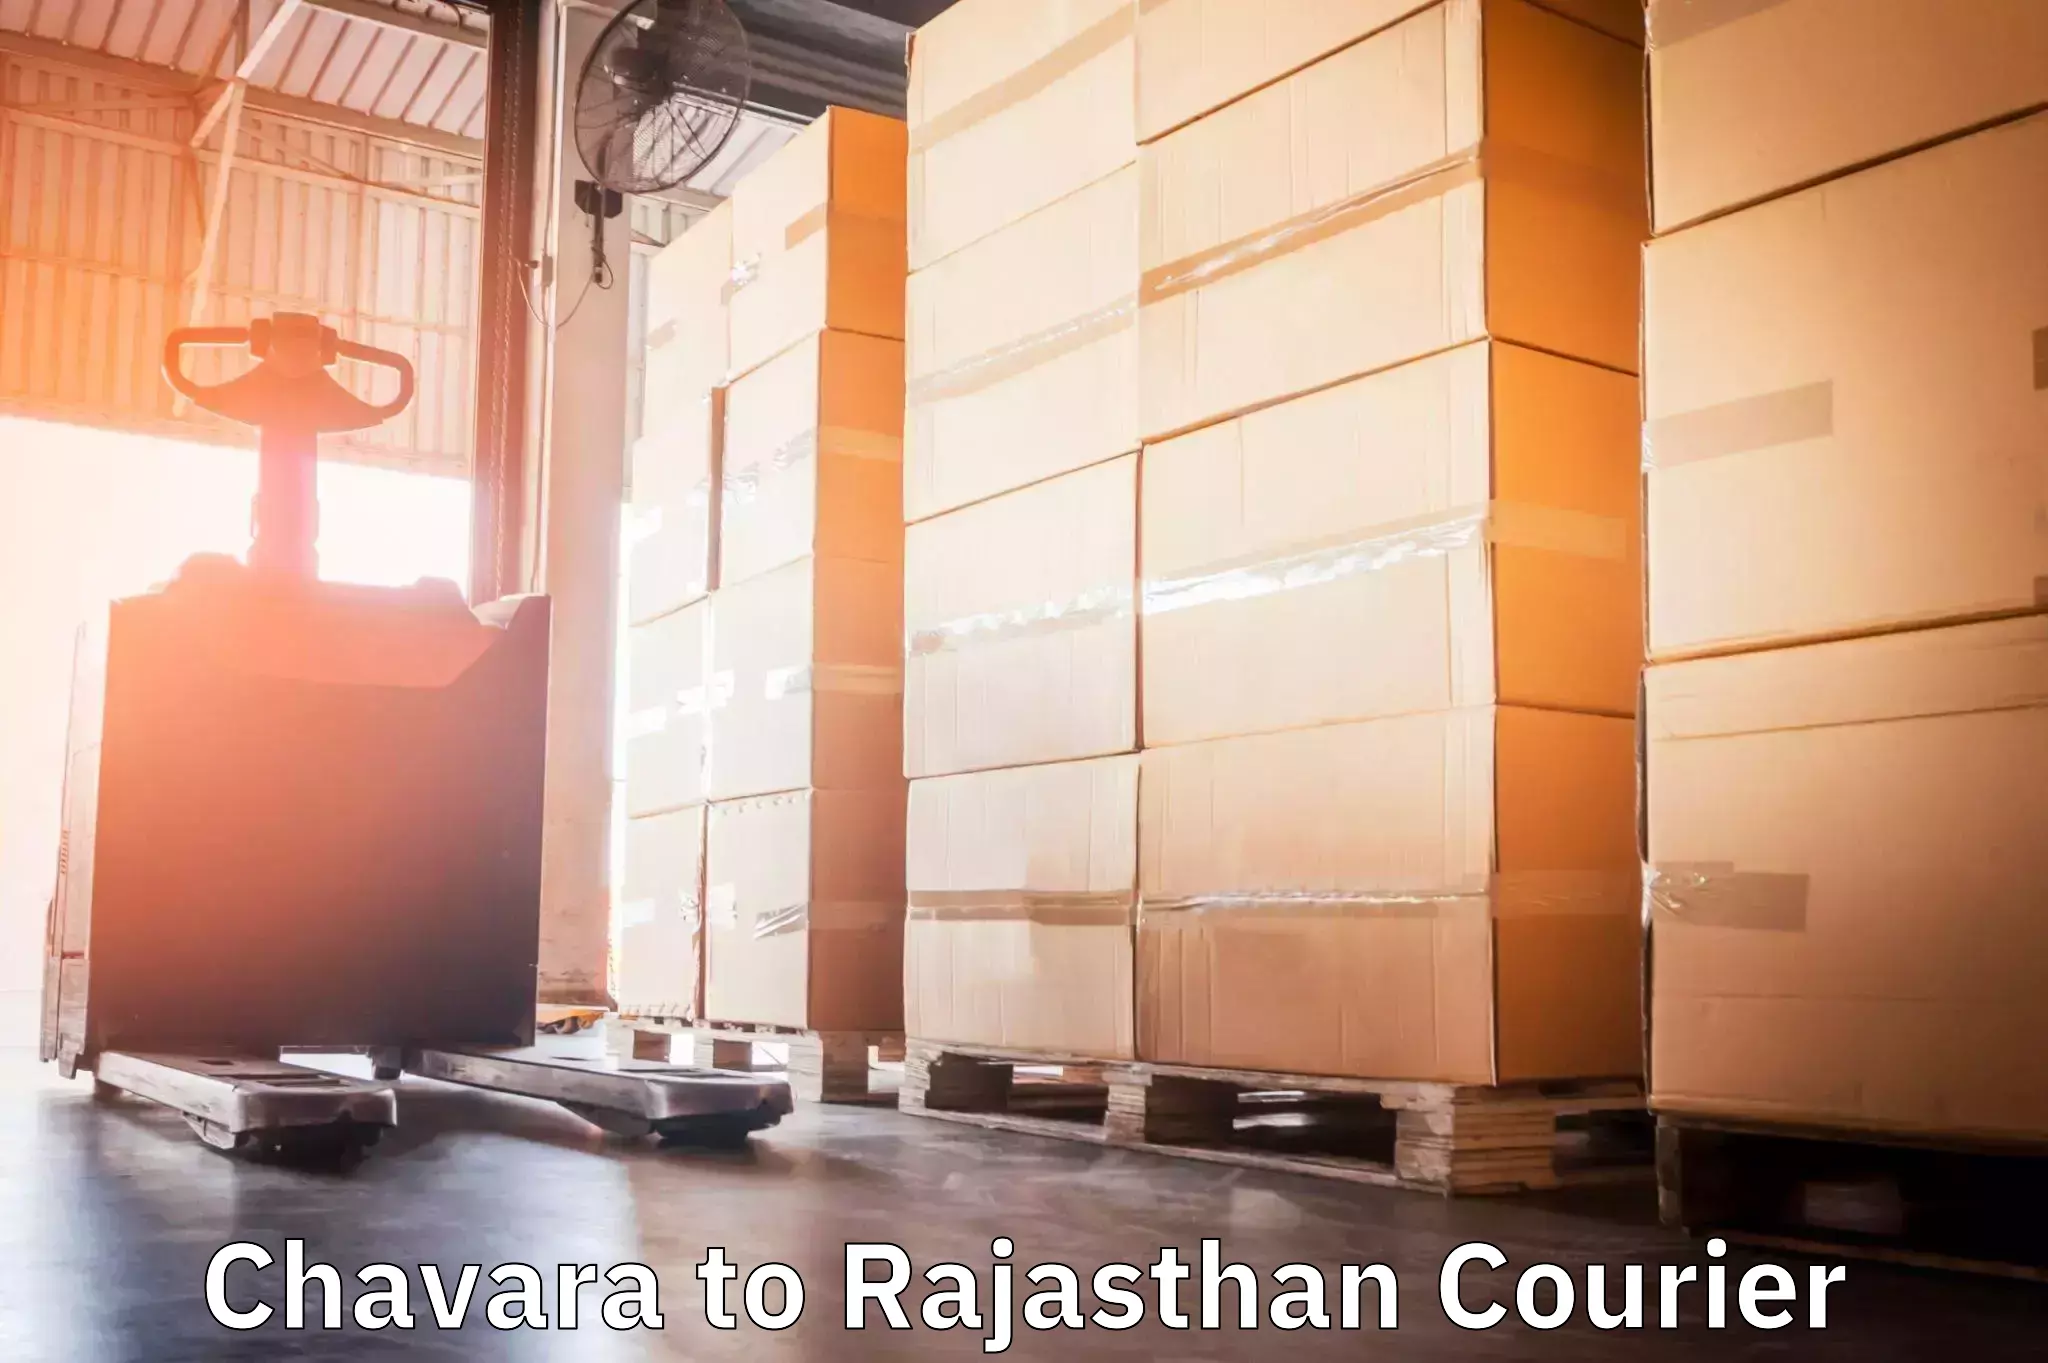 Residential courier service Chavara to Rajasthan